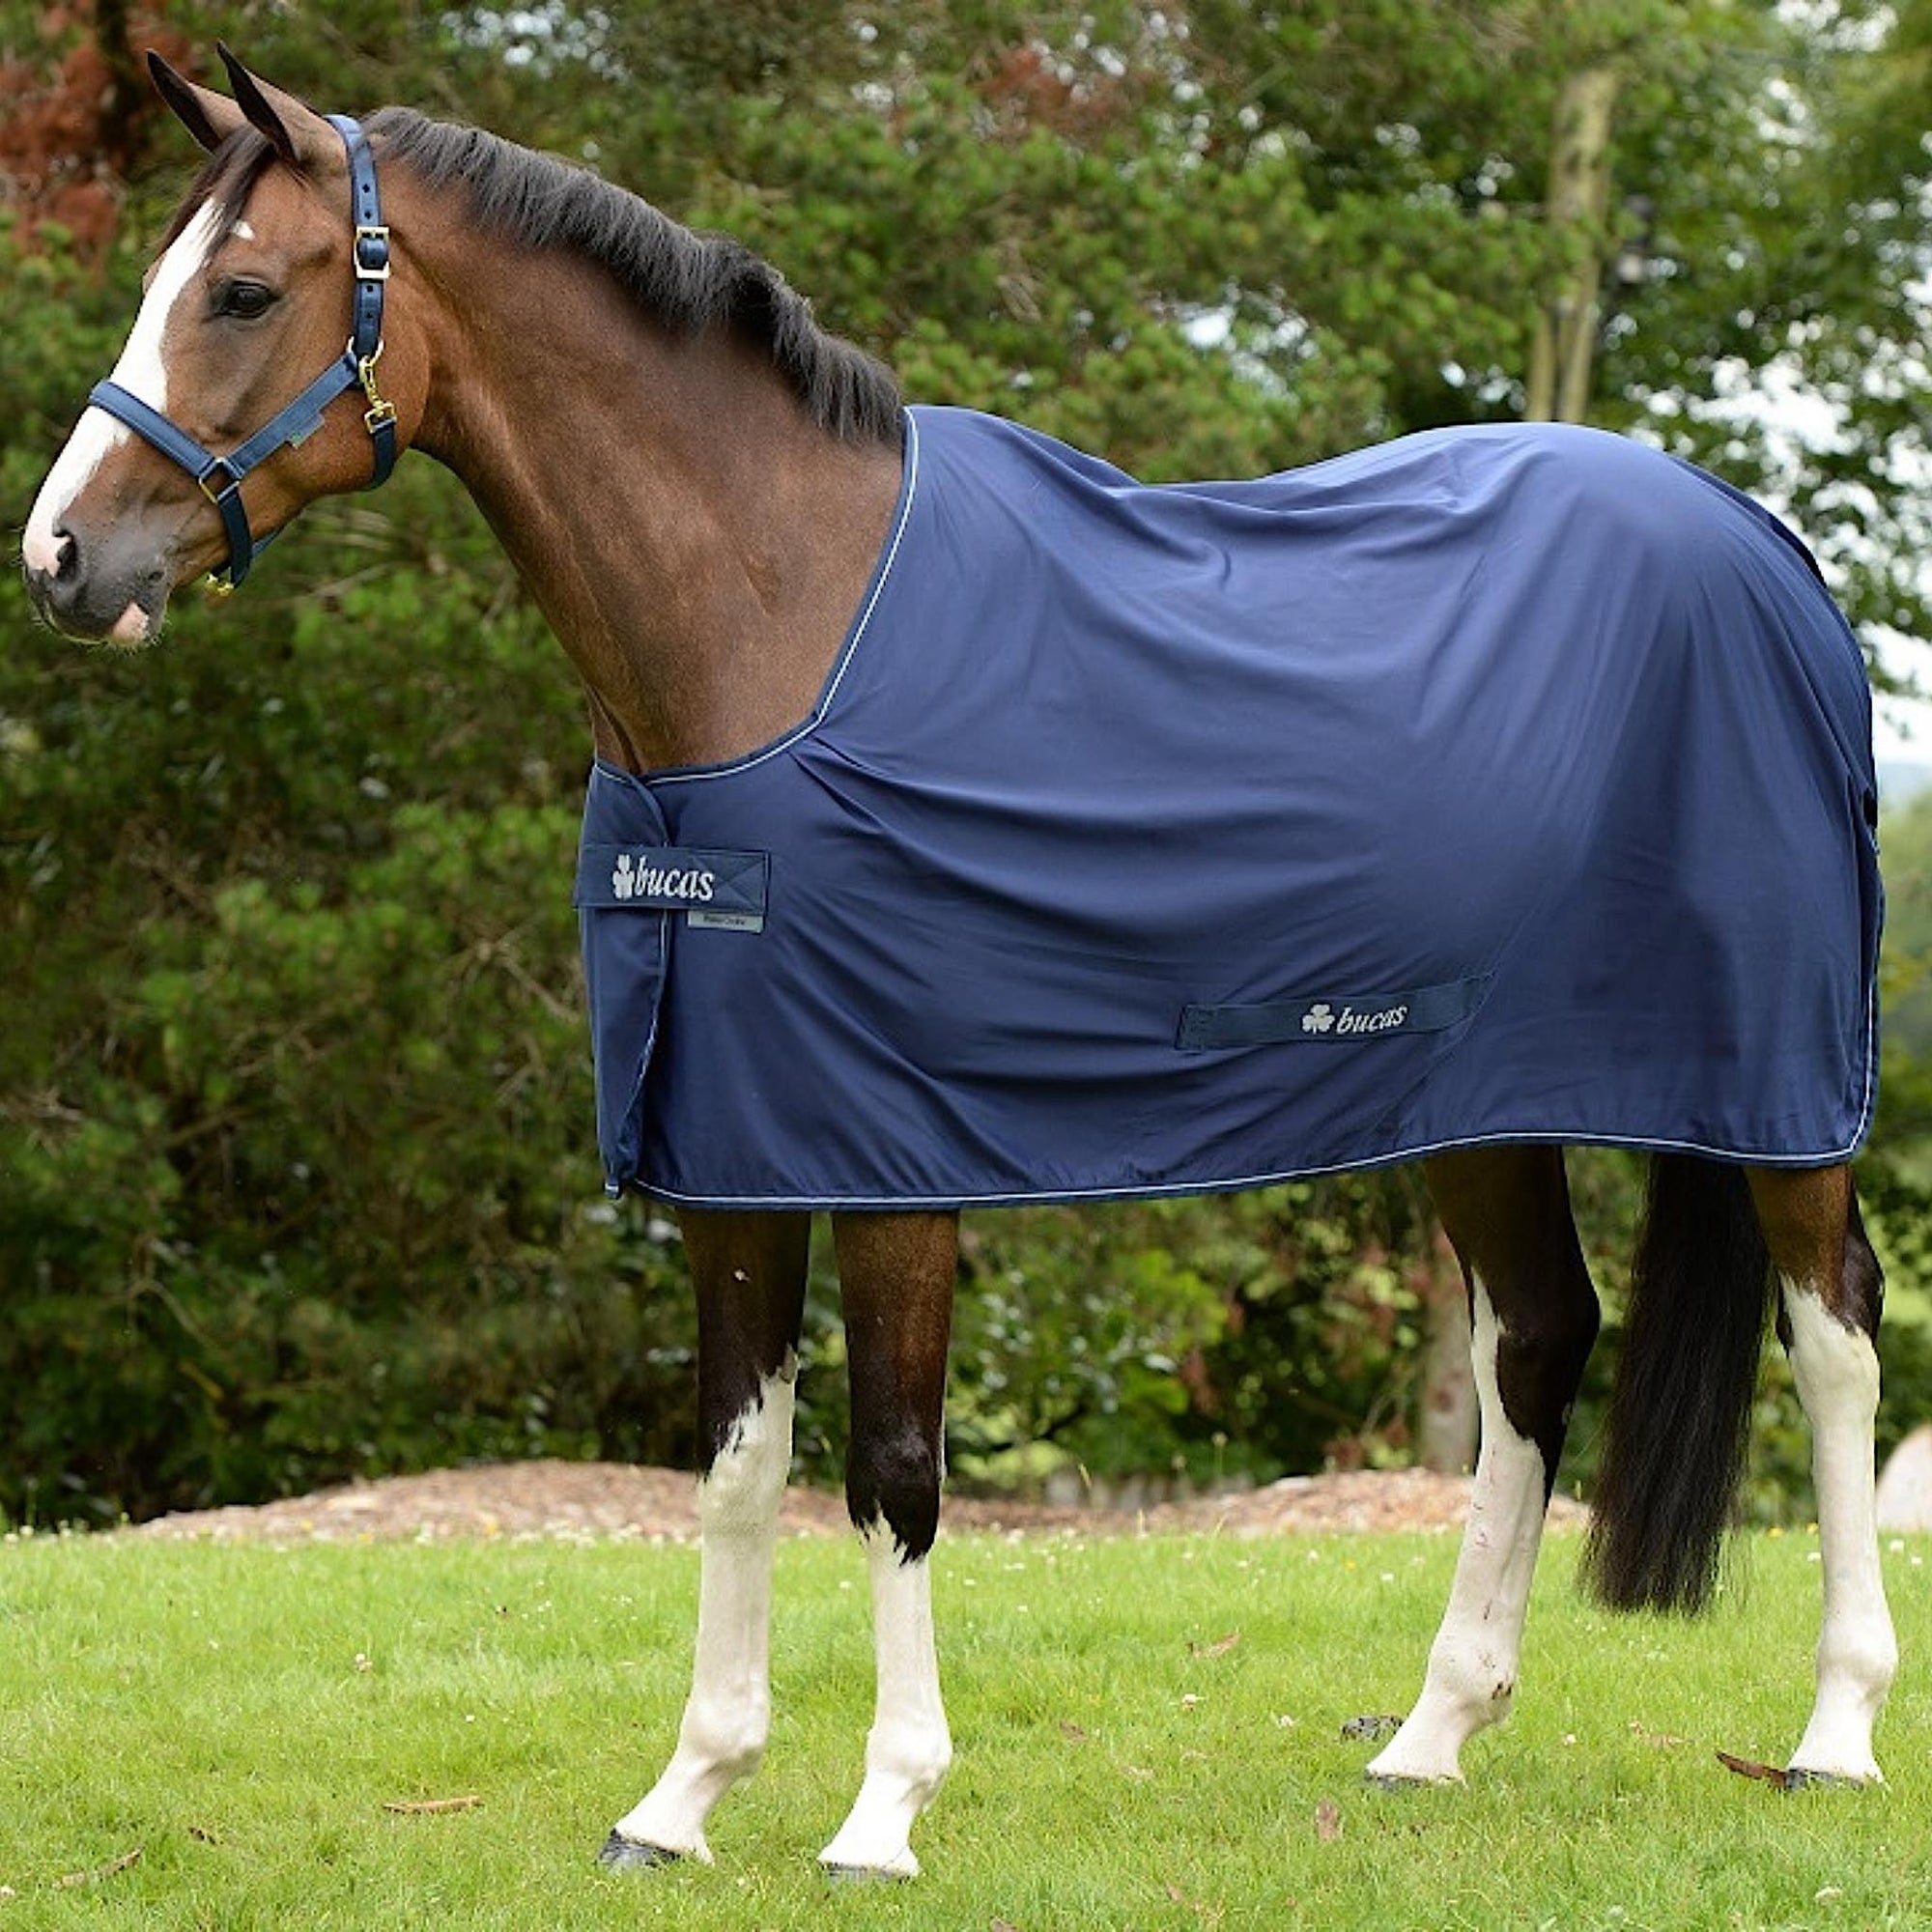 Horse wearing navy power cooler rug with subtle white details.